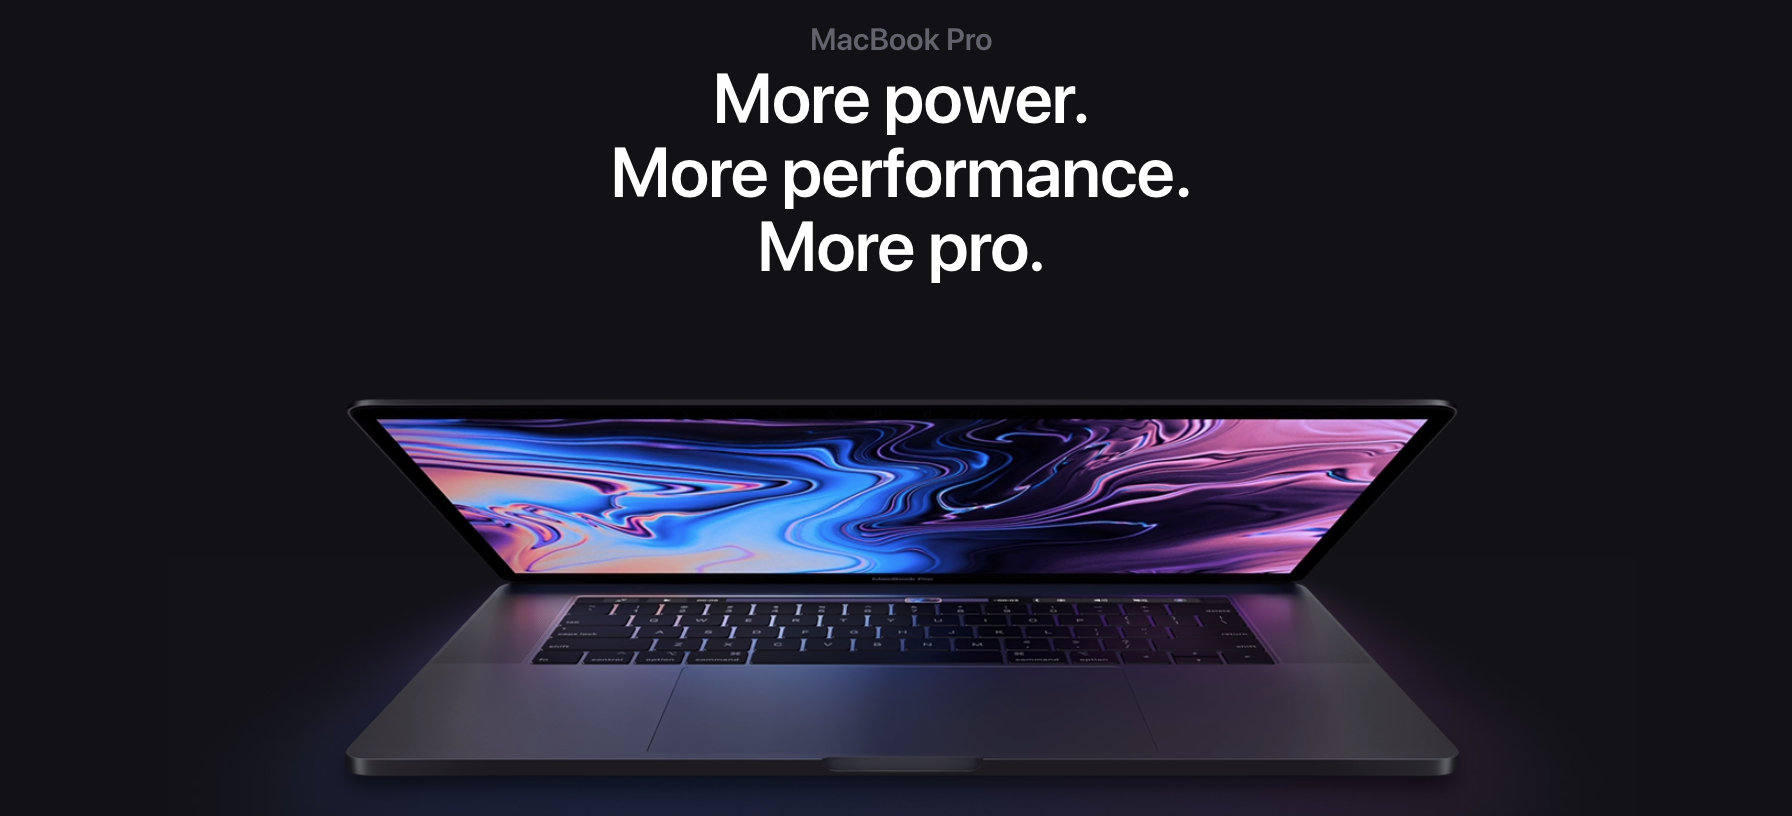 First 8-core MacBook Pro performance gains spotted in Geekbench